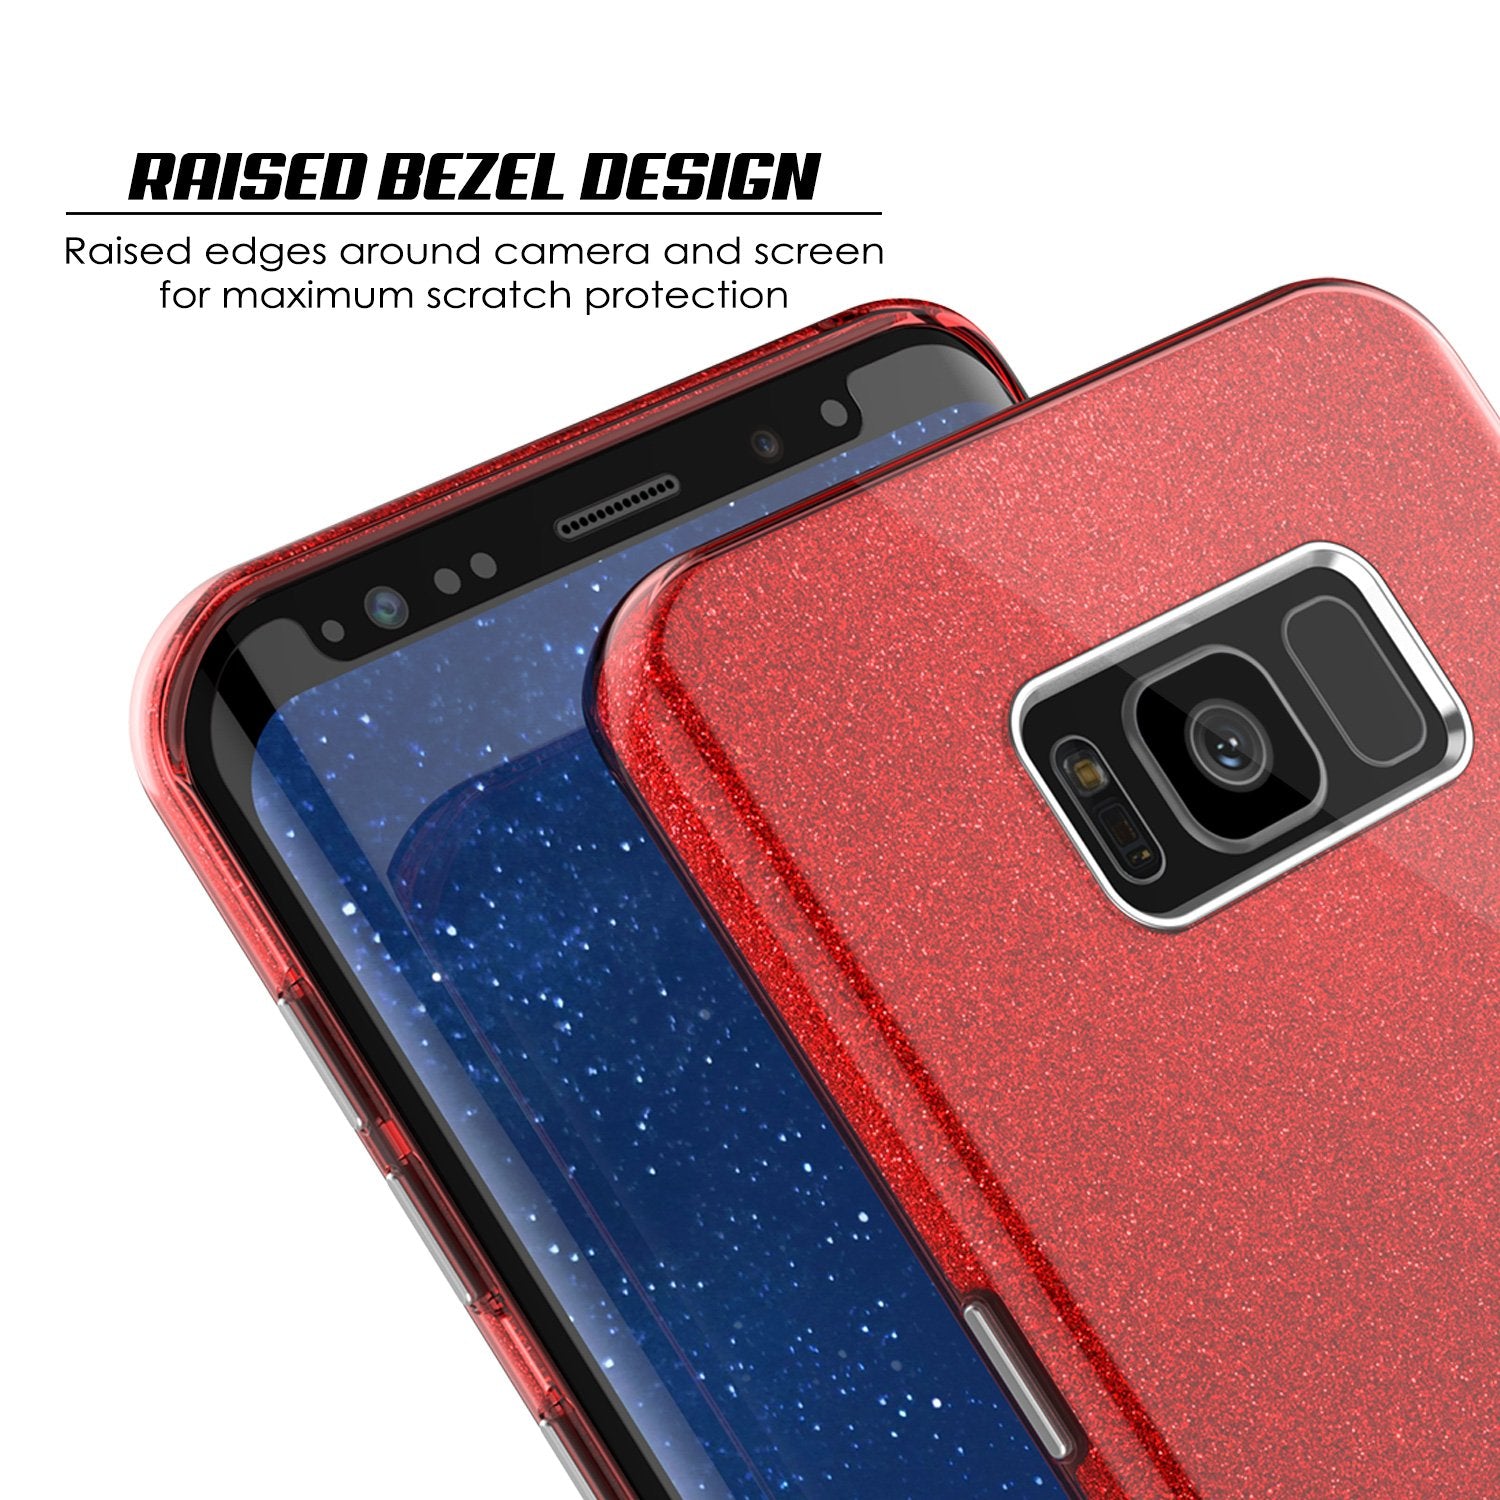 Galaxy S8 Plus Case, Punkcase Galactic 2.0 Series Ultra Slim Protective Armor TPU Cover [Red]